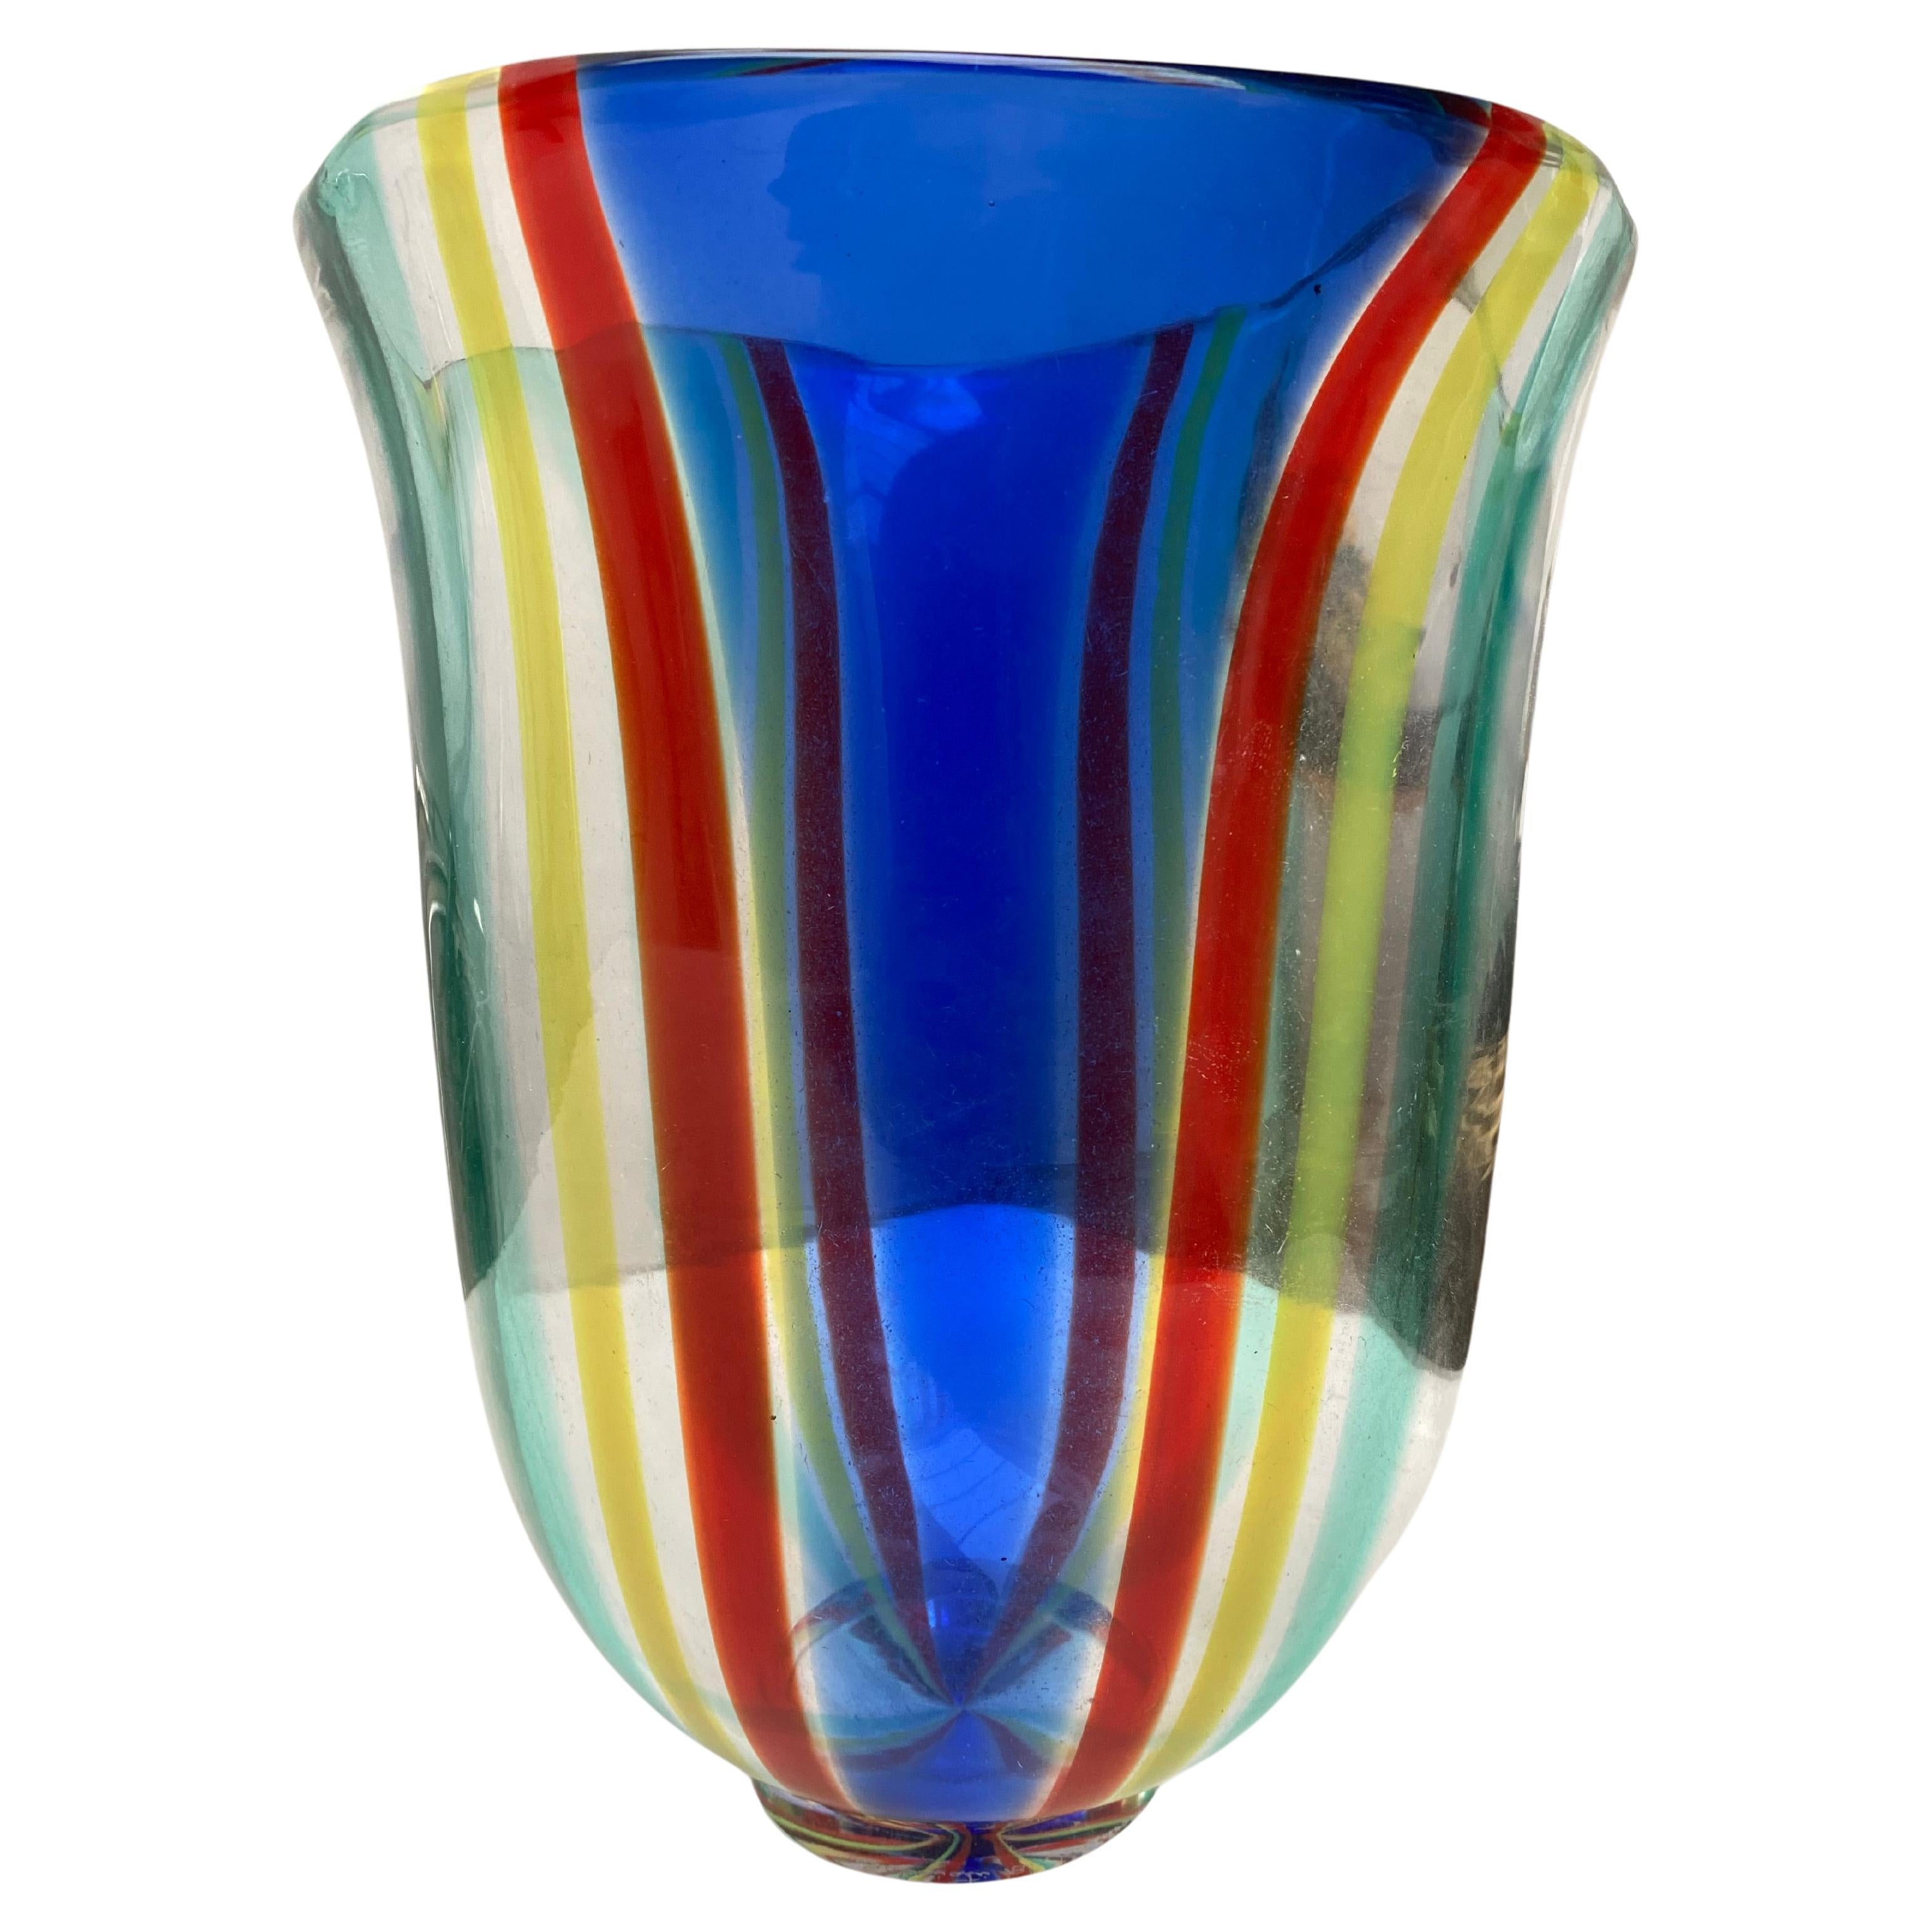 Mid-Century Modern New in Box Large Murano Glass Vase hand signed Berit Johansson for Salviati 1991 For Sale